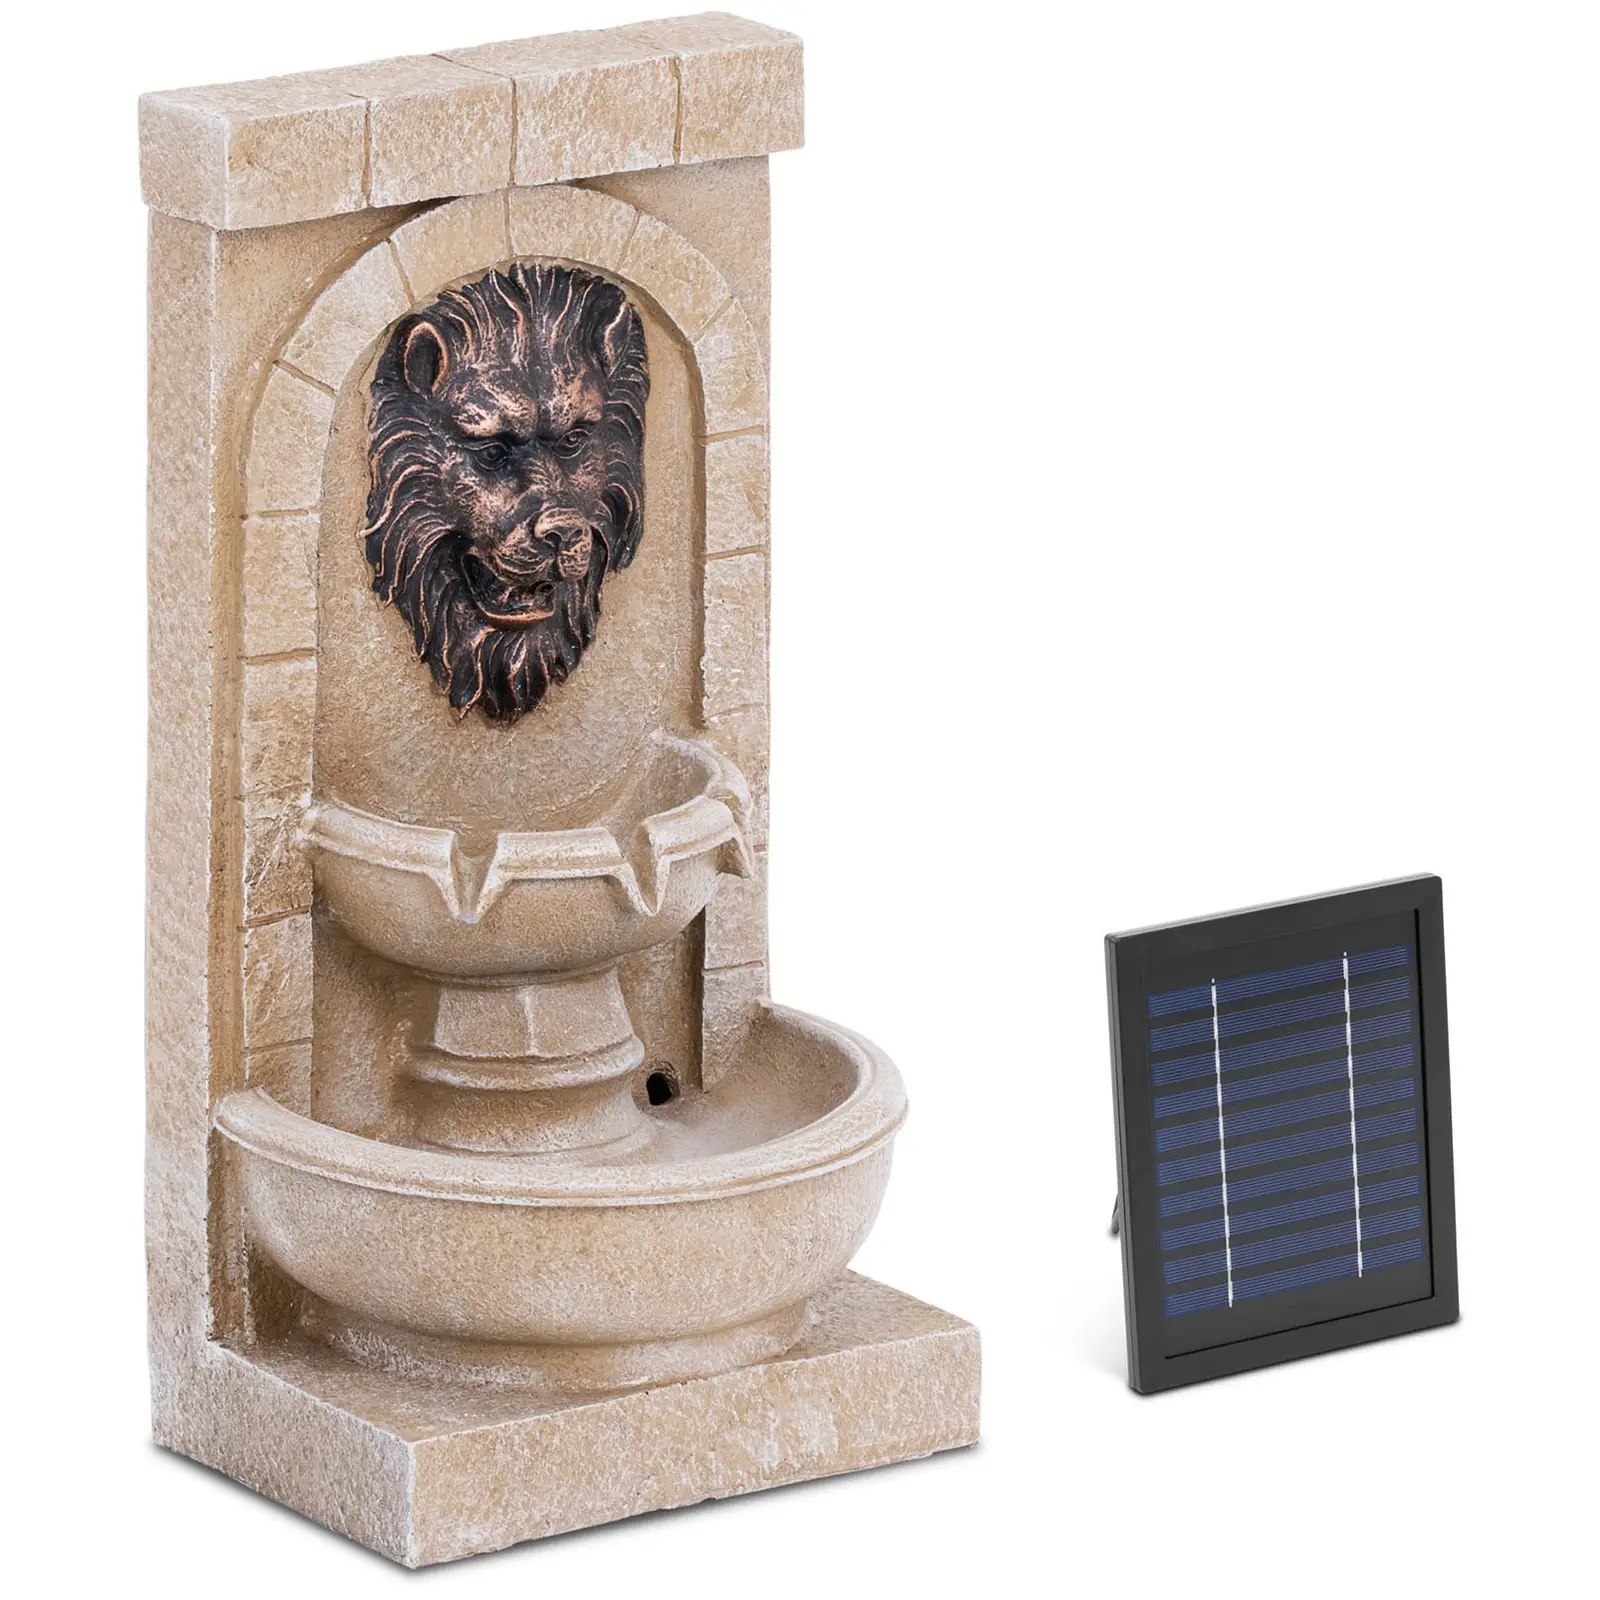 Solar Water Fountain - 2 levels with spouting lion head - LED lighting